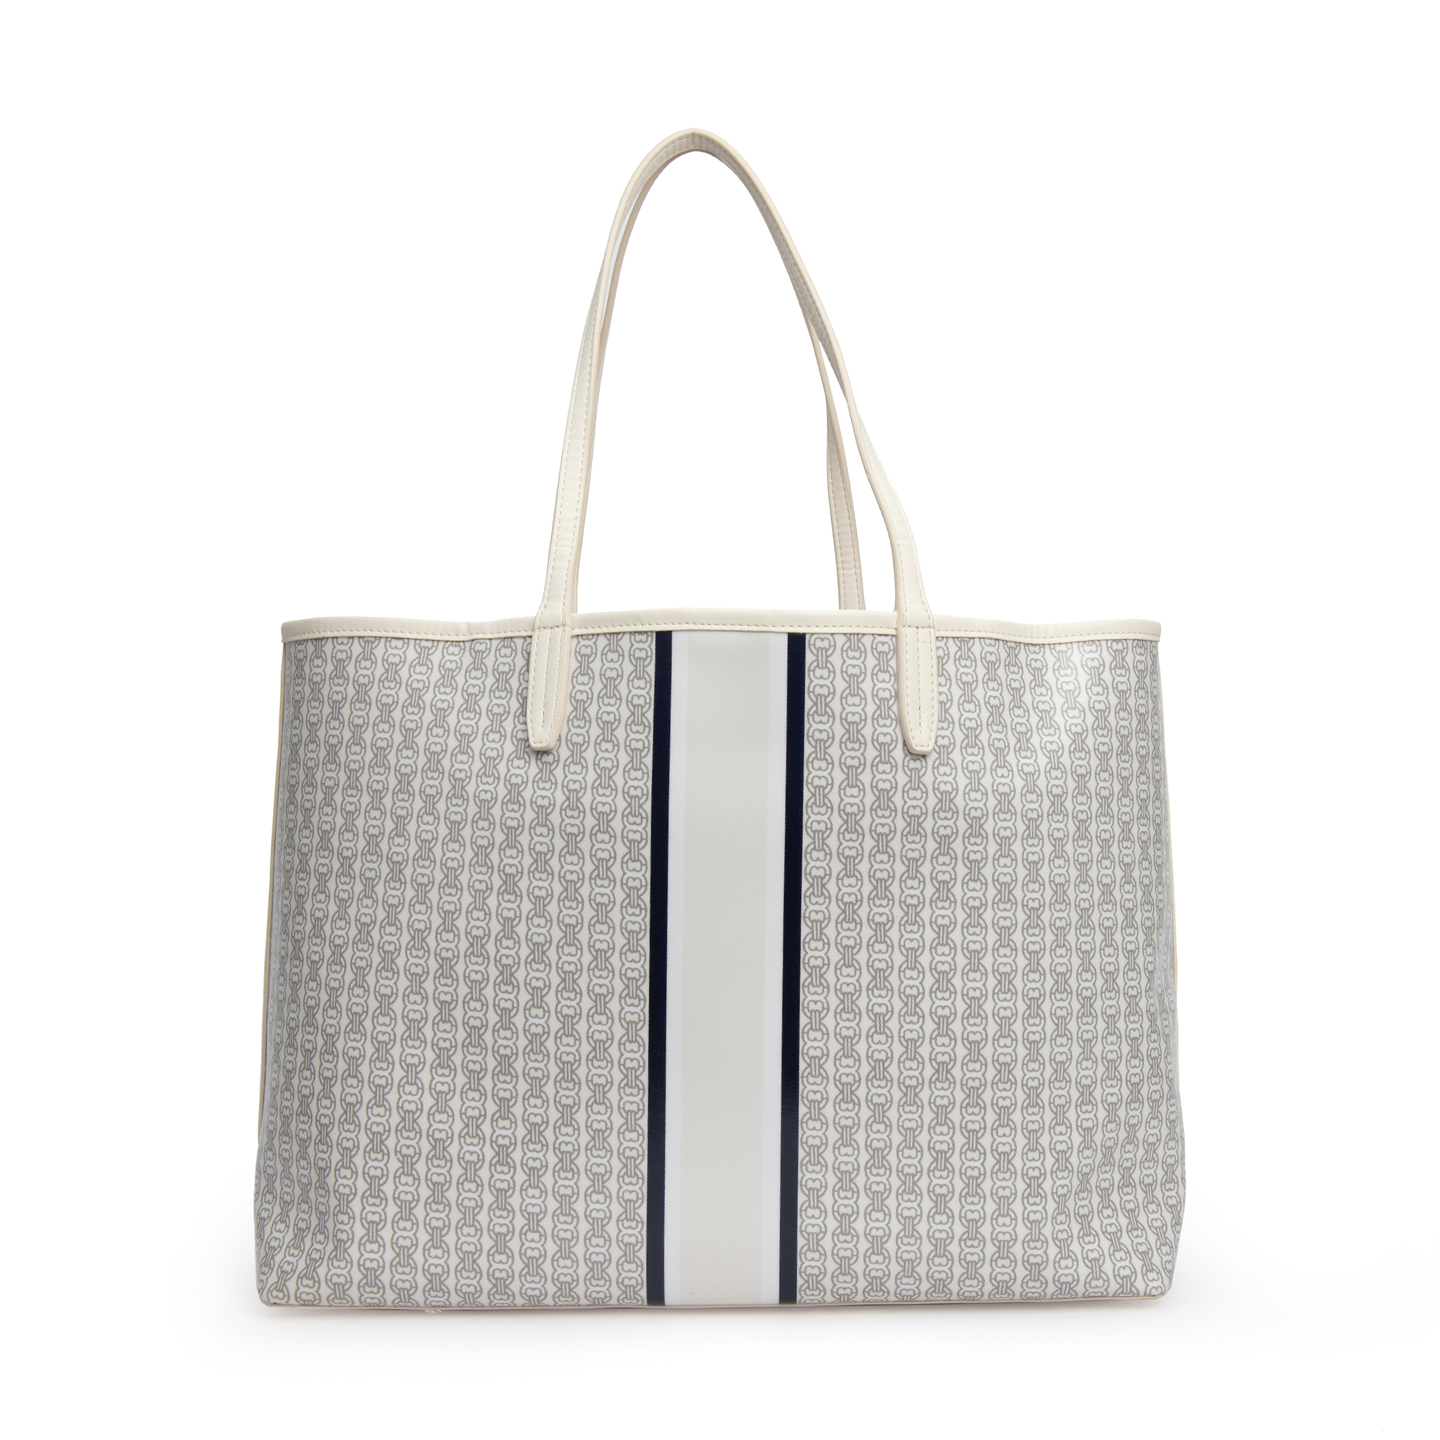 Tory Burch Gemini Link Tote Bag, New Ivory - LabelCentric